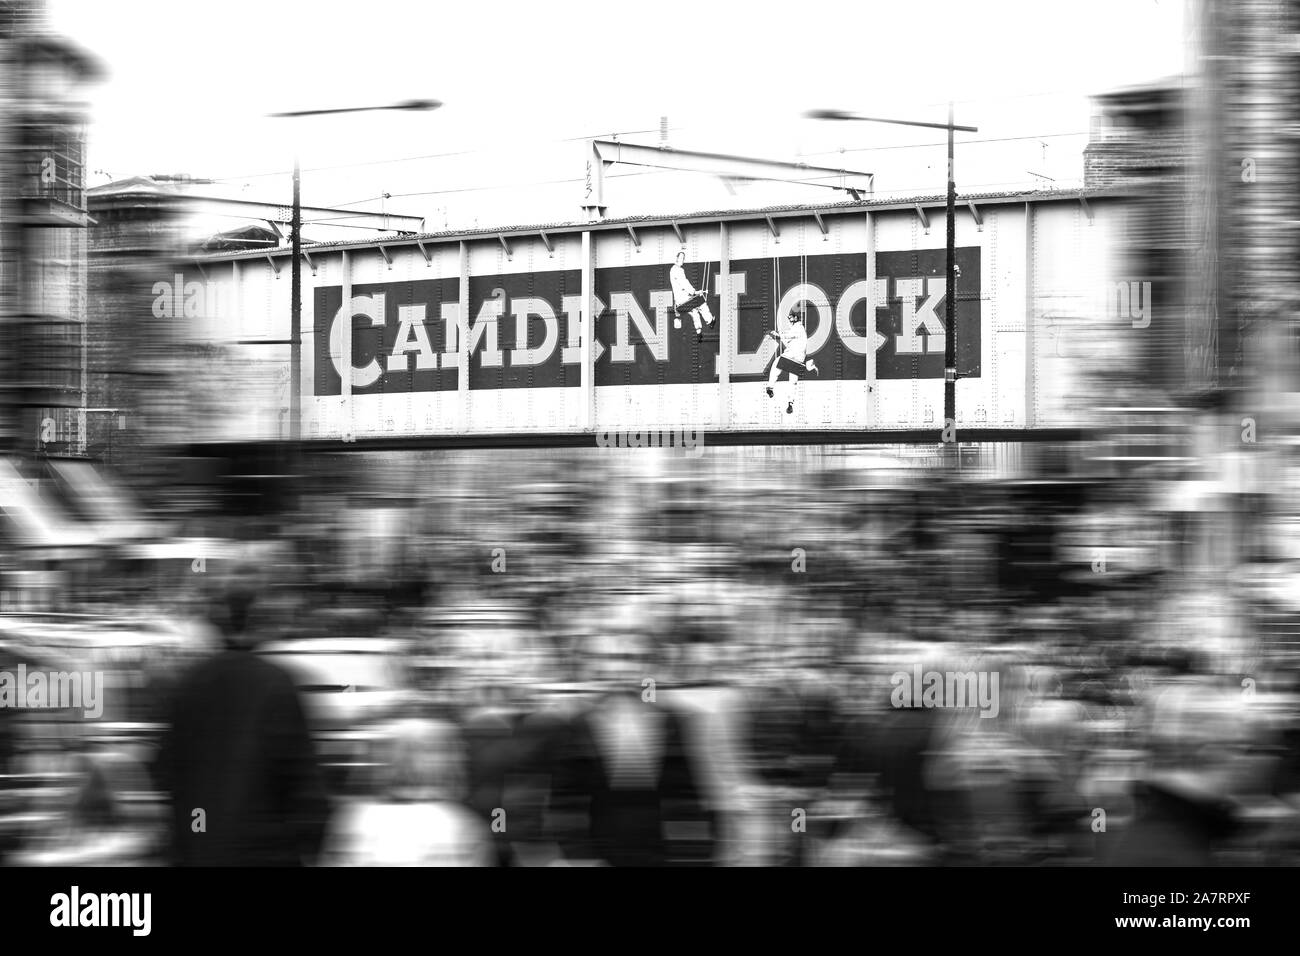 London, Centre of Camden Town: Iron bridge with Camden Lock logo and blurring of movement in the background Stock Photo